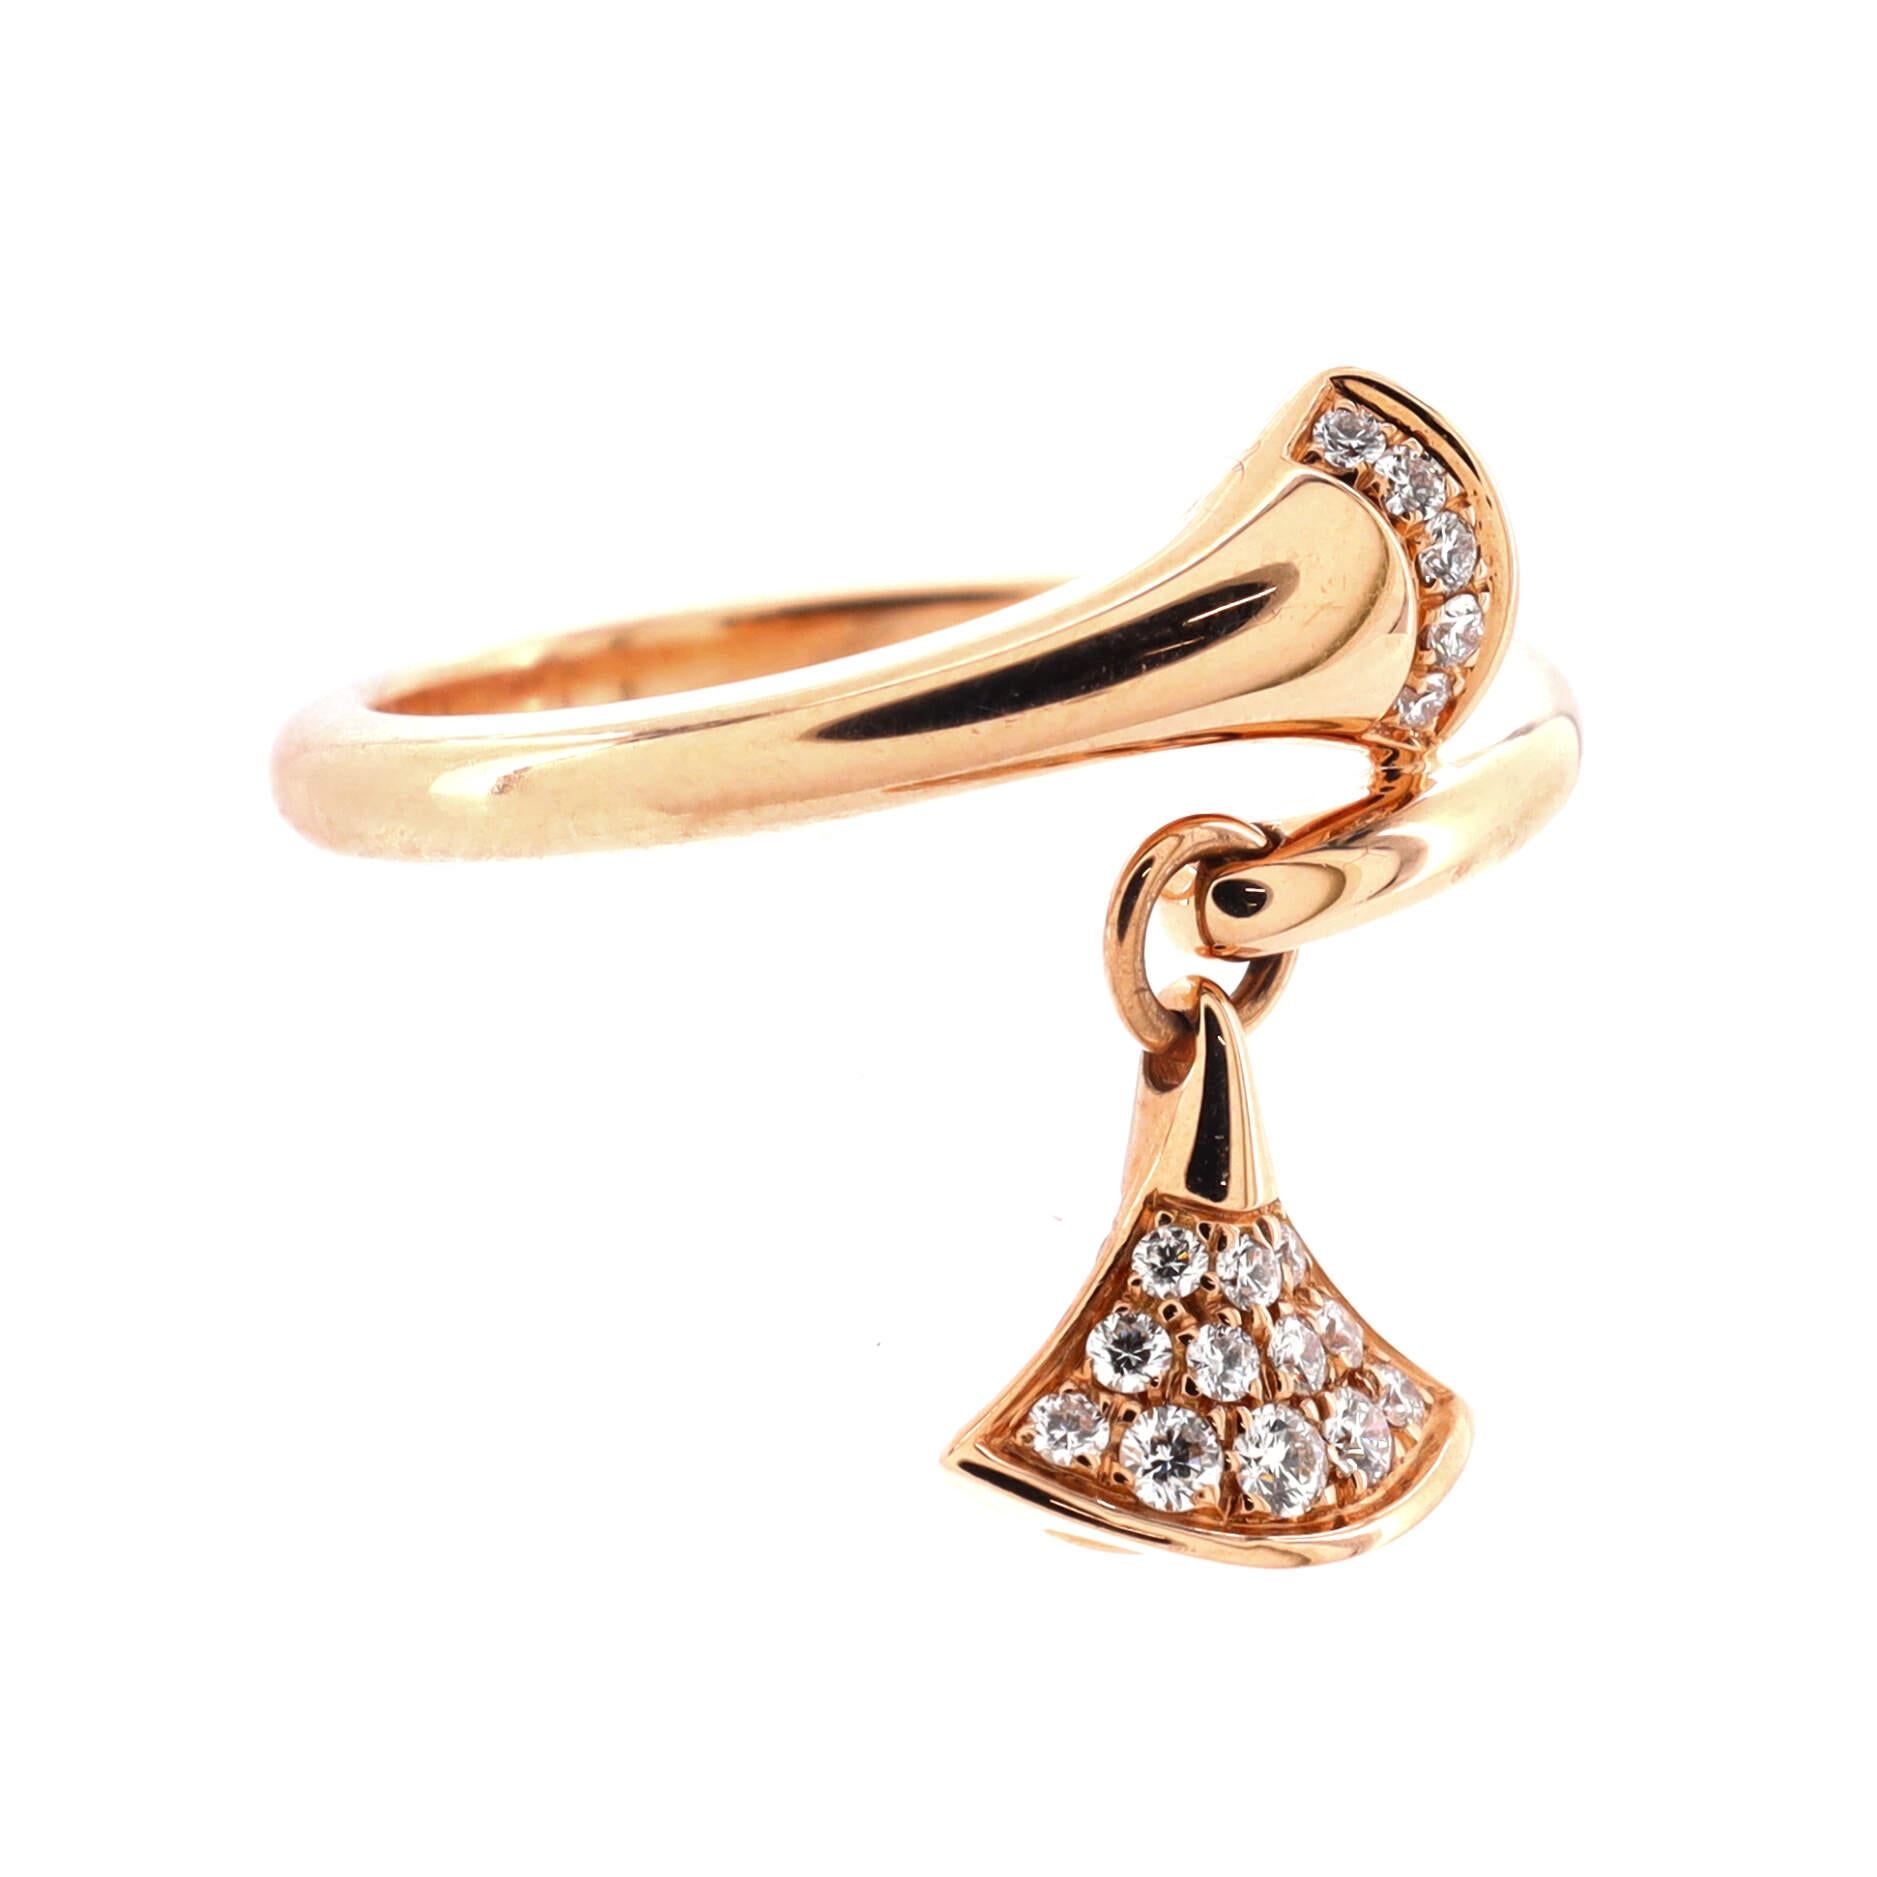 Condition: Great. Minor wear throughout.
Accessories: No Accessories
Measurements: Size: 7, Width: 2.35 mm
Designer: Bvlgari
Model: Divas' Dream Charm Ring 18K Rose Gold with Diamonds
Exterior Color: Rose Gold
Item Number: 184294/364